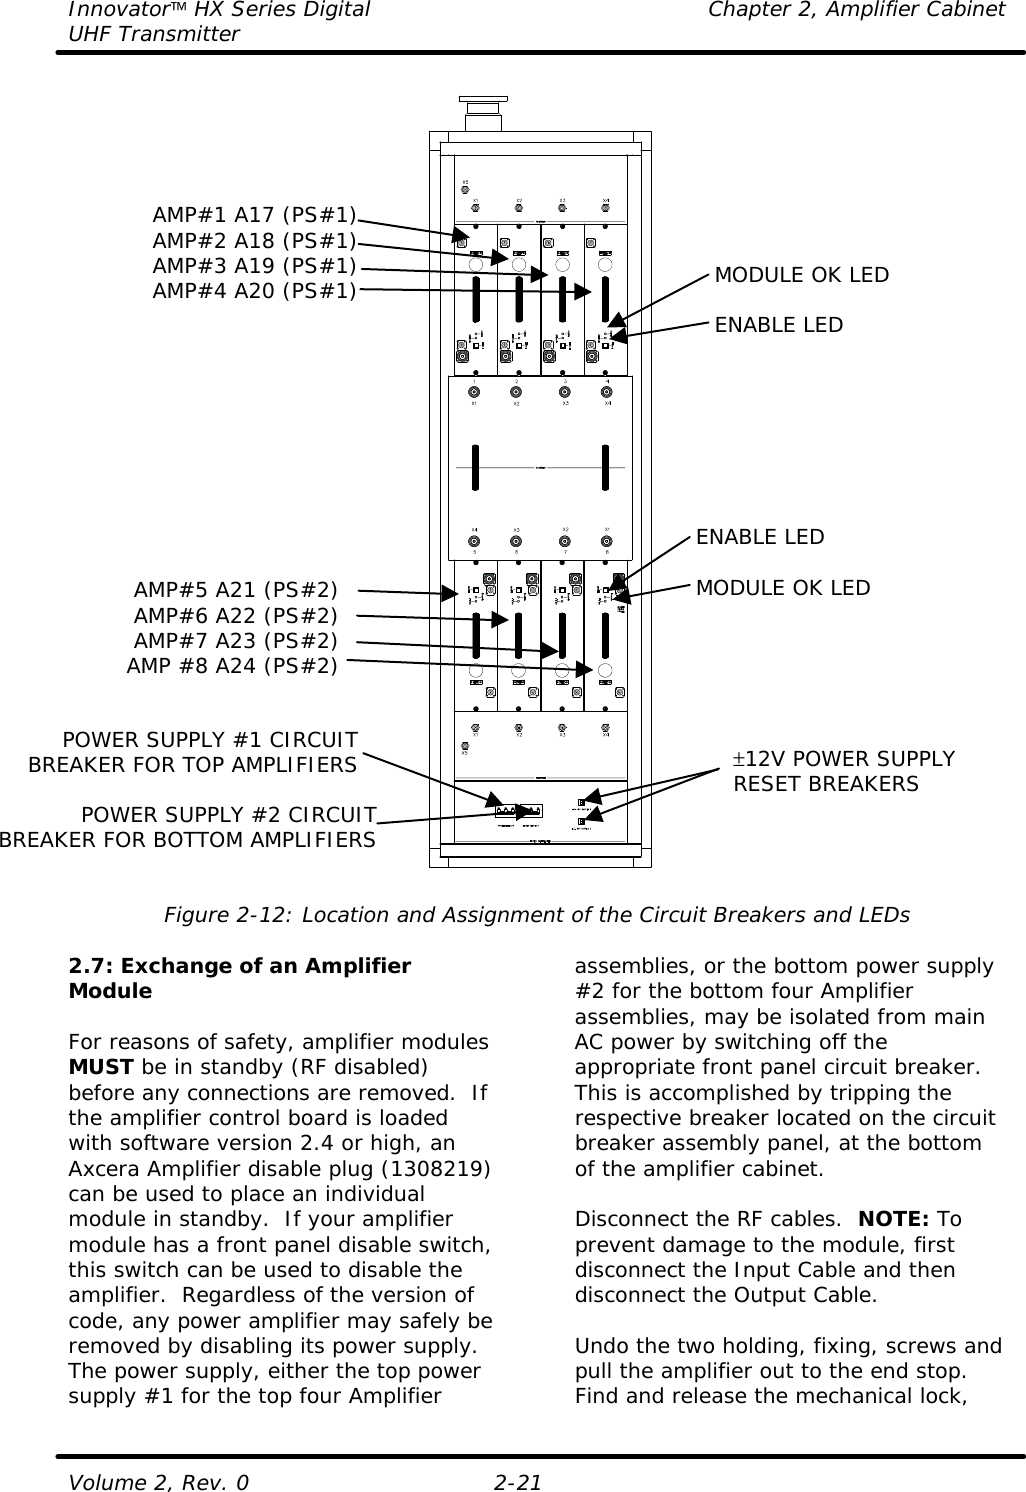 Innovator HX Series Digital Chapter 2, Amplifier Cabinet UHF Transmitter Volume 2, Rev. 0 2-21   Figure 2-12: Location and Assignment of the Circuit Breakers and LEDs  2.7: Exchange of an Amplifier Module  For reasons of safety, amplifier modules MUST be in standby (RF disabled) before any connections are removed.  If the amplifier control board is loaded with software version 2.4 or high, an Axcera Amplifier disable plug (1308219) can be used to place an individual module in standby.  If your amplifier module has a front panel disable switch, this switch can be used to disable the amplifier.  Regardless of the version of code, any power amplifier may safely be removed by disabling its power supply.  The power supply, either the top power supply #1 for the top four Amplifier assemblies, or the bottom power supply #2 for the bottom four Amplifier assemblies, may be isolated from main AC power by switching off the appropriate front panel circuit breaker.  This is accomplished by tripping the respective breaker located on the circuit breaker assembly panel, at the bottom of the amplifier cabinet.    Disconnect the RF cables.  NOTE: To prevent damage to the module, first disconnect the Input Cable and then disconnect the Output Cable.  Undo the two holding, fixing, screws and pull the amplifier out to the end stop.  Find and release the mechanical lock, AMP#1 A17 (PS#1)  AMP#2 A18 (PS#1)  AMP#3 A19 (PS#1)  AMP#4 A20 (PS#1)AMP#5 A21 (PS#2)AMP#6 A22 (PS#2)AMP#7 A23 (PS#2)AMP #8 A24 (PS#2)POWER SUPPLY #1 CIRCUIT BREAKER FOR TOP AMPLIFIERSPOWER SUPPLY #2 CIRCUIT BREAKER FOR BOTTOM AMPLIFIERSMODULE OK LED  ENABLE LED ENABLE LED  MODULE OK LED ±12V POWER SUPPLY RESET BREAKERS 